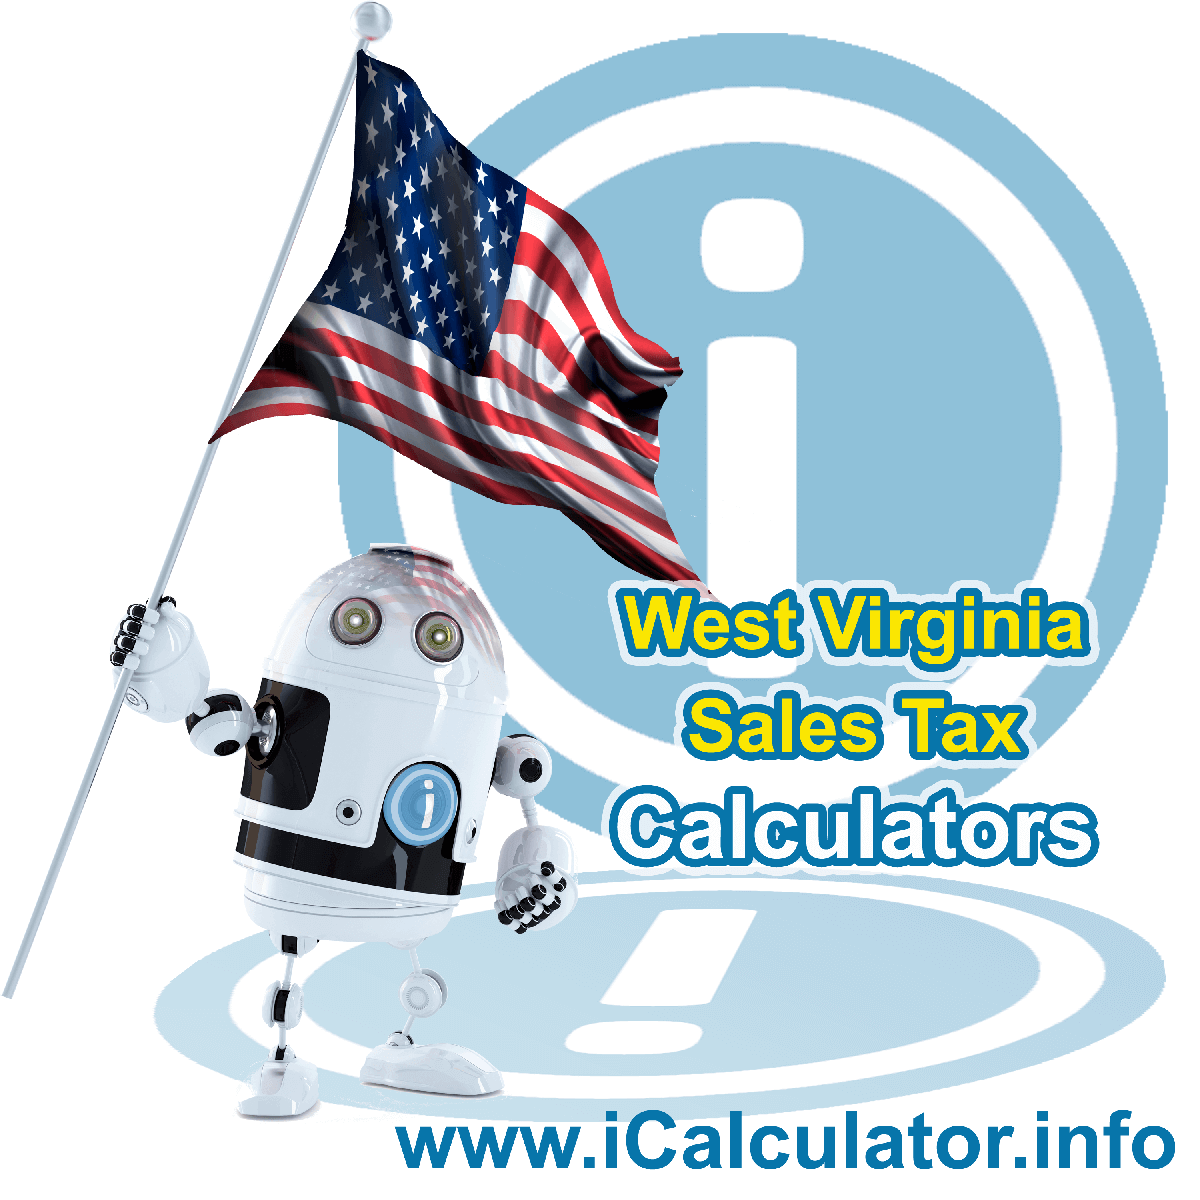 Bluefield, West Virginia Sales Tax Comparison Calculator: This image illustrates a calculator robot comparing sales tax in Bluefield, West Virginia manually using the Bluefield, West Virginia Sales Tax Formula. You can use this information to compare Sales Tax manually or use the Bluefield, West Virginia Sales Tax Comparison Calculator to calculate and compare Bluefield, West Virginia sales tax online.